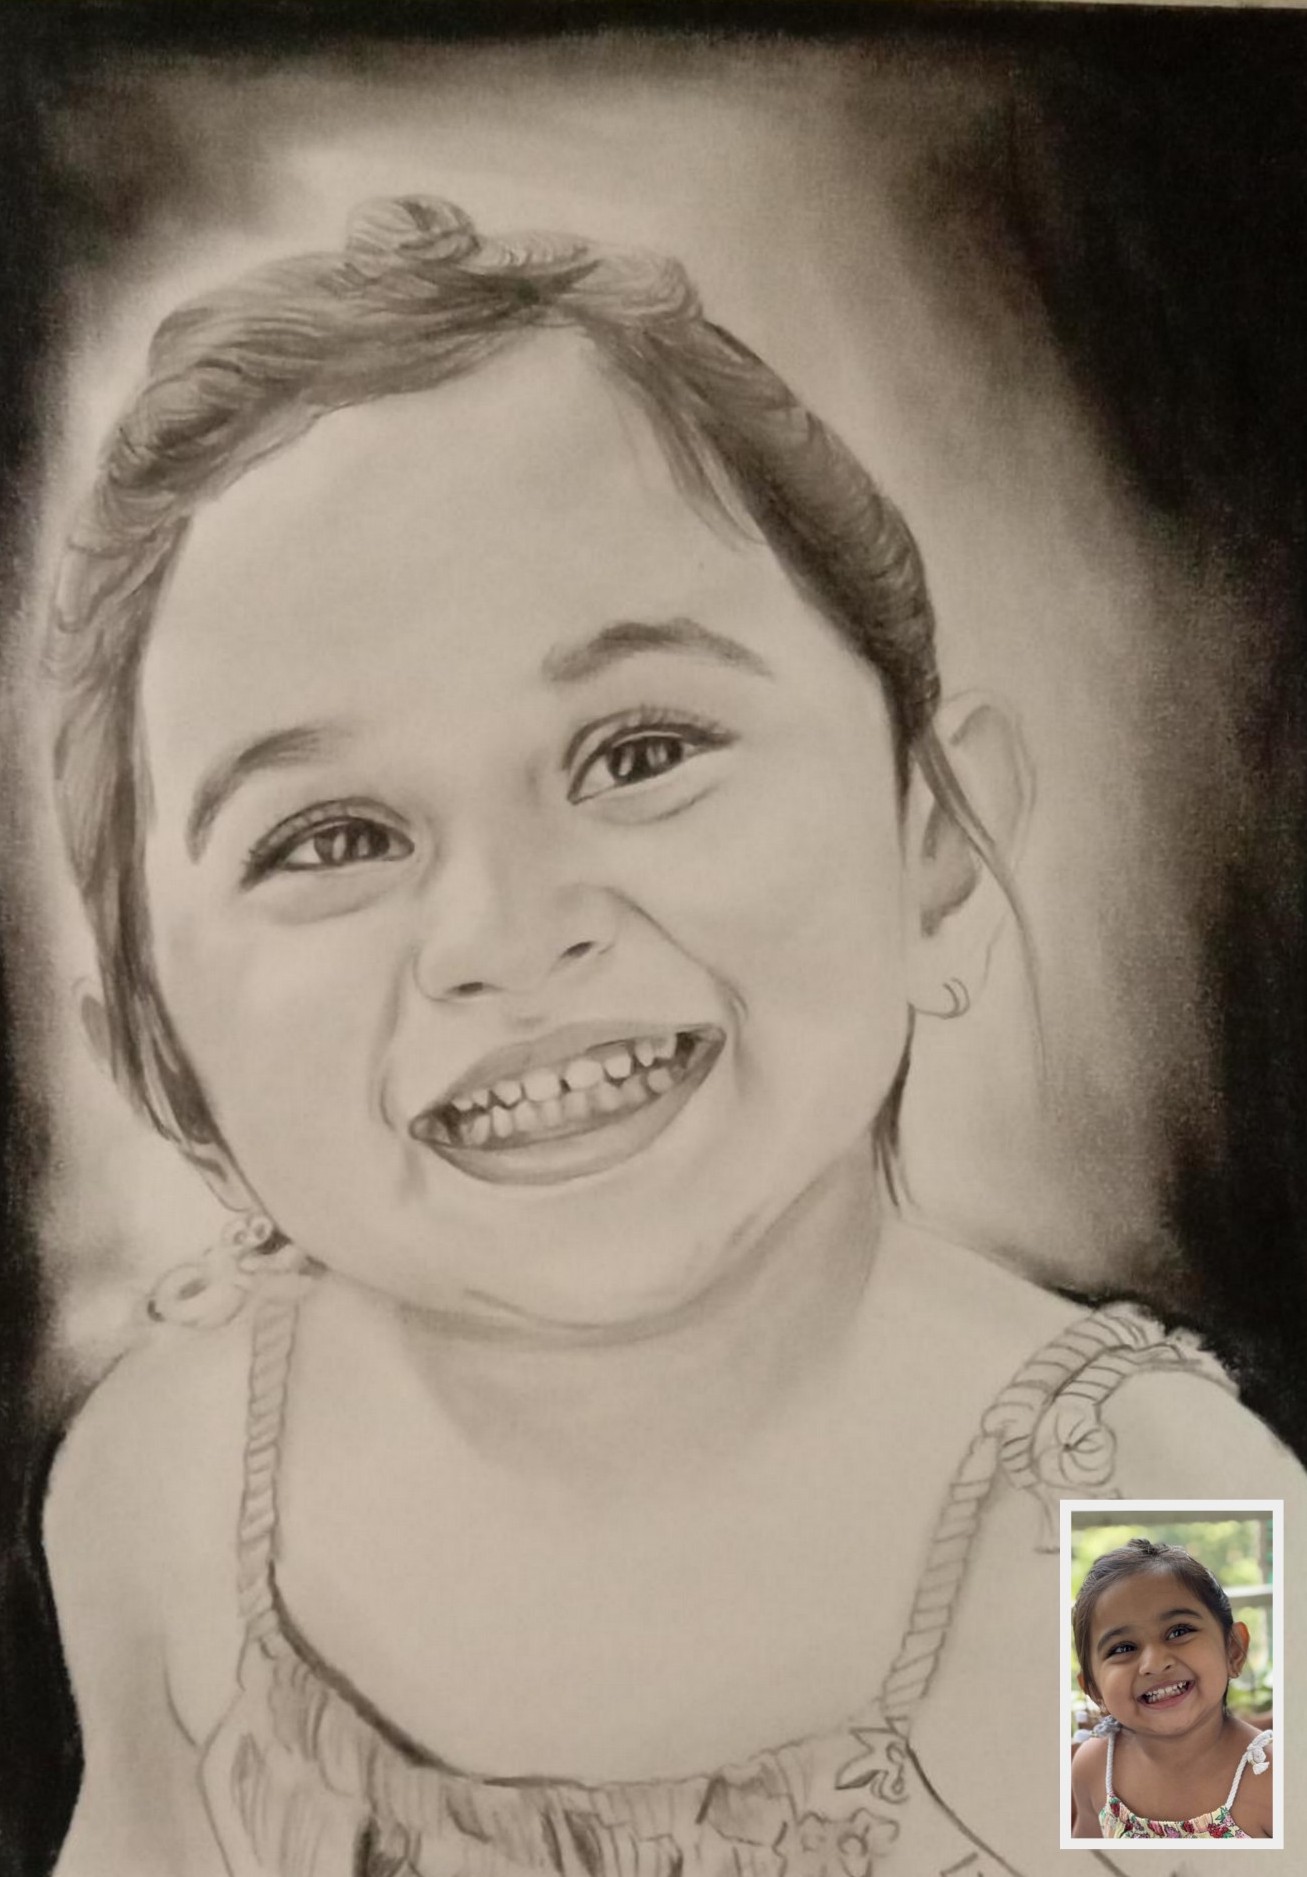 smiling baby girl face portrait drawing, sketch artist, sketch artist near me, portrait sketch,